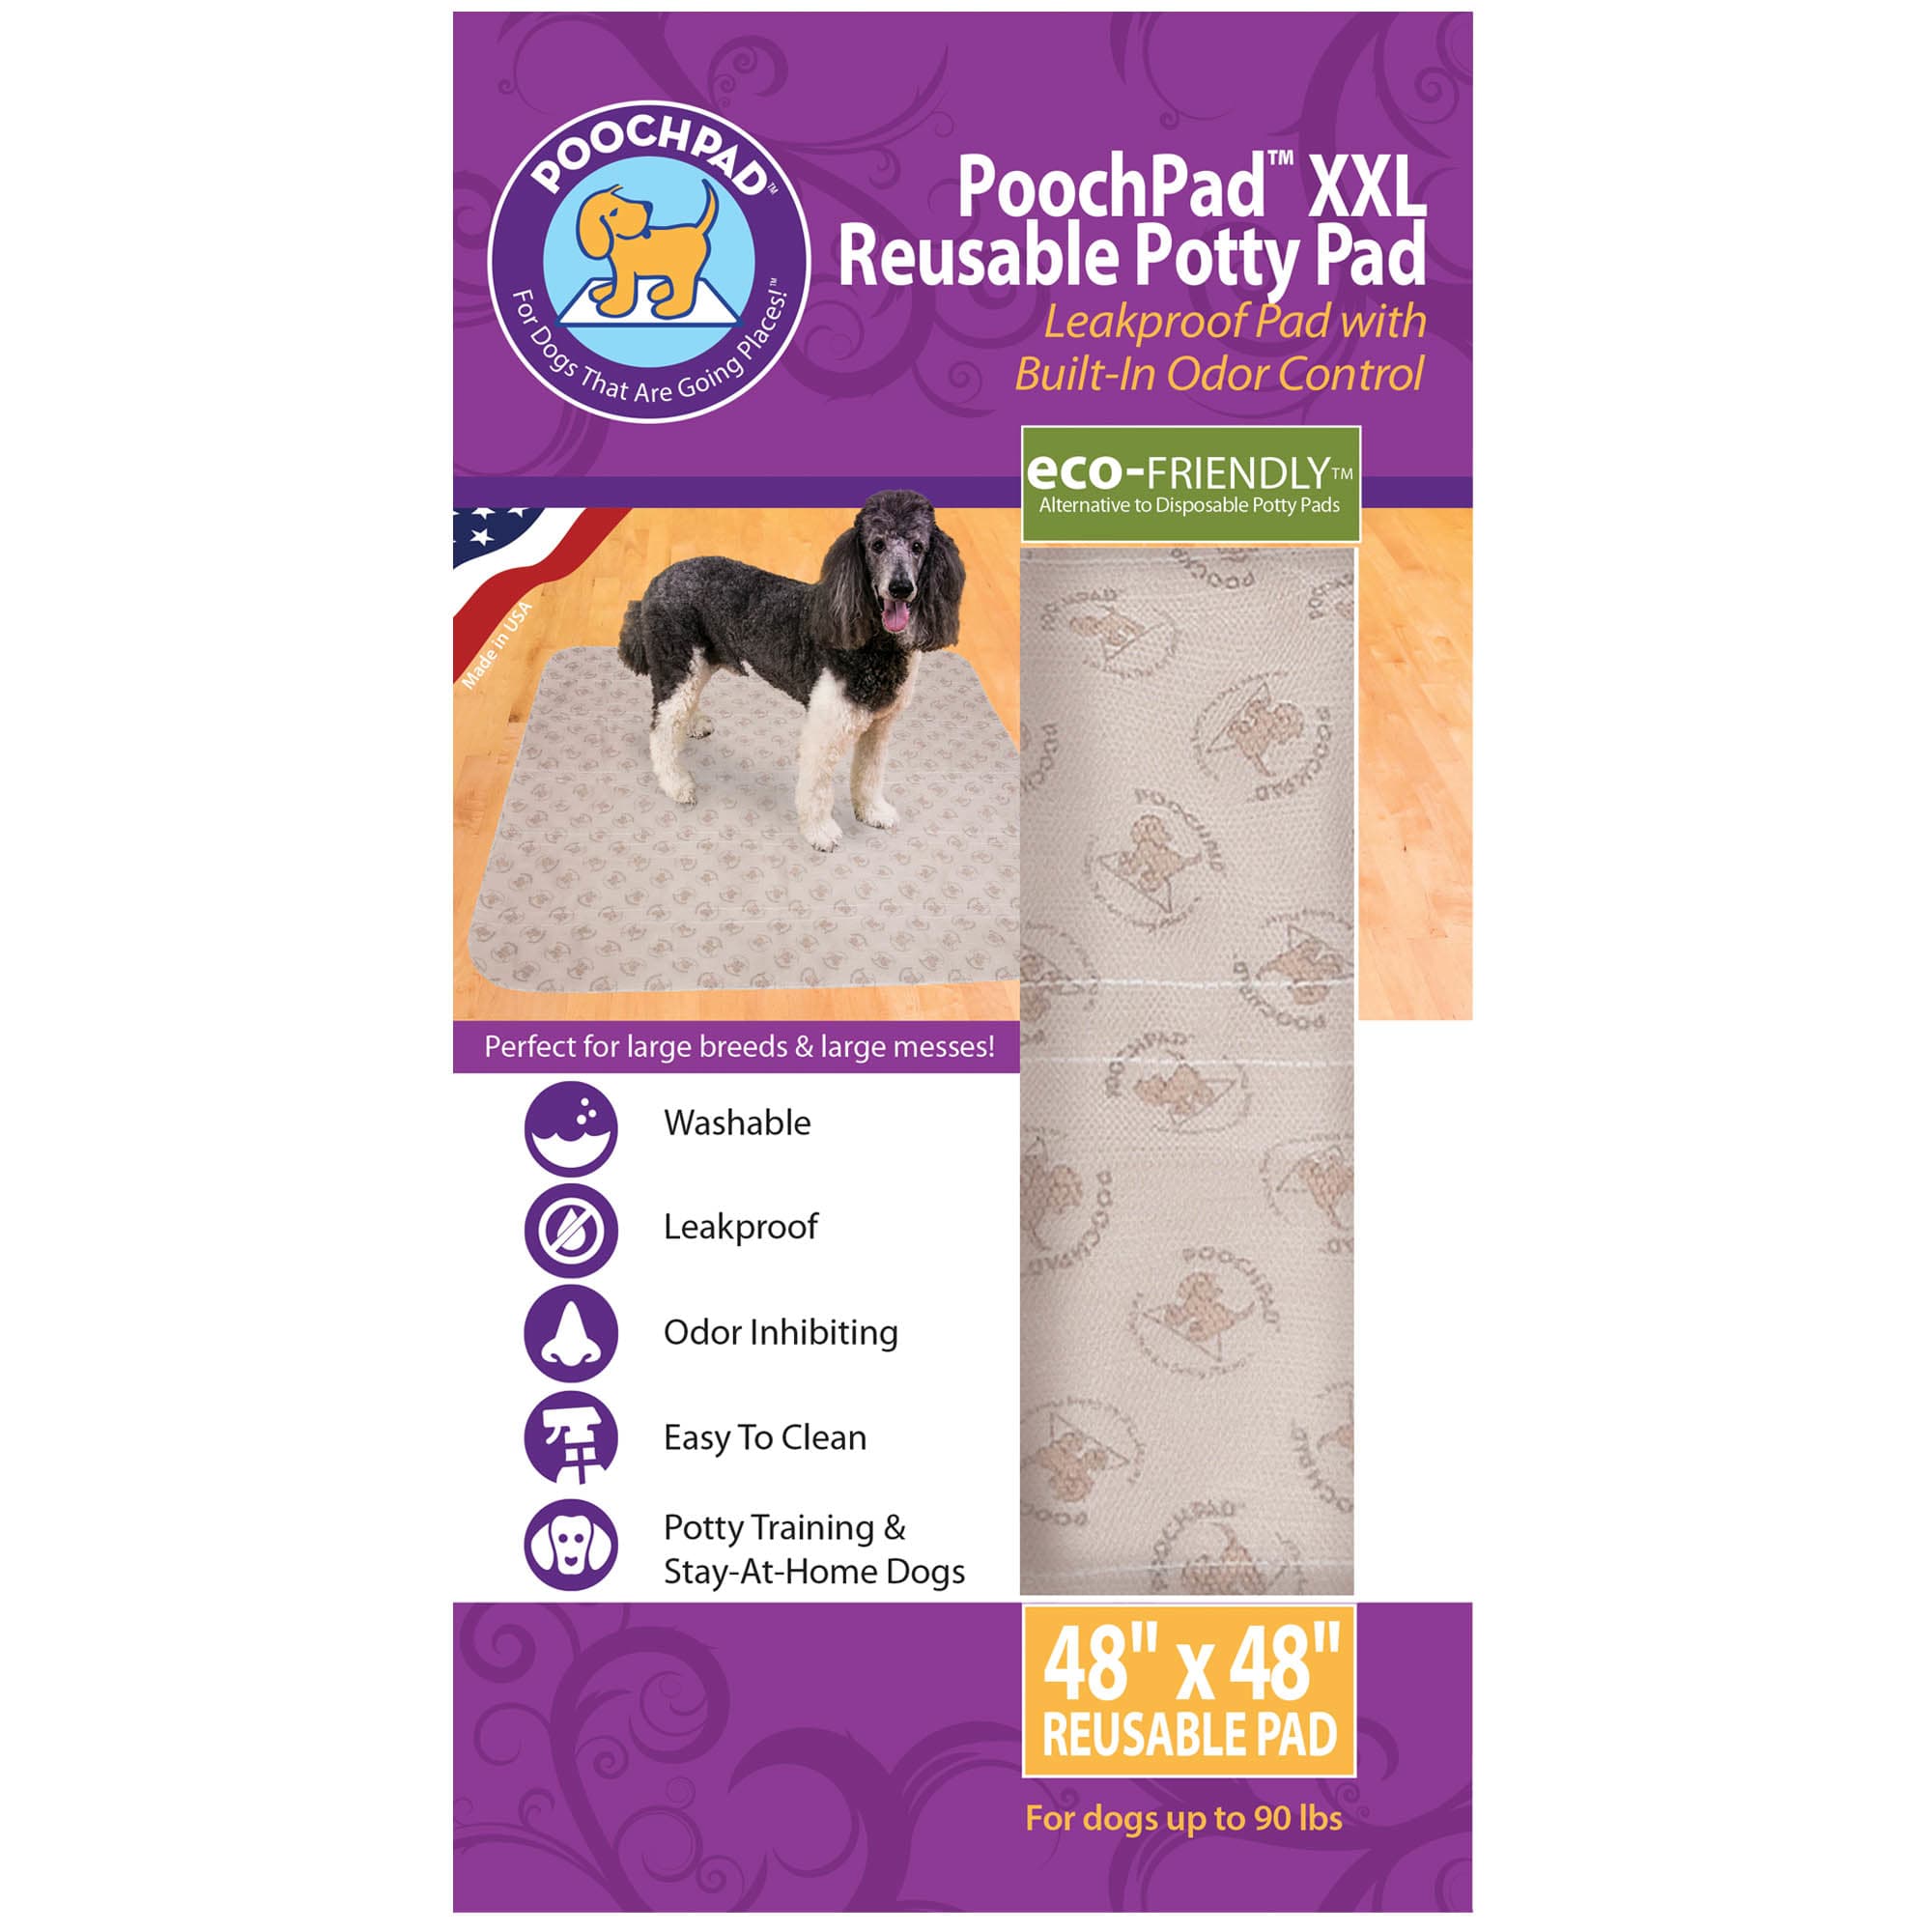 PoochPads Reusable Absorbent Potty Pad for Dogs